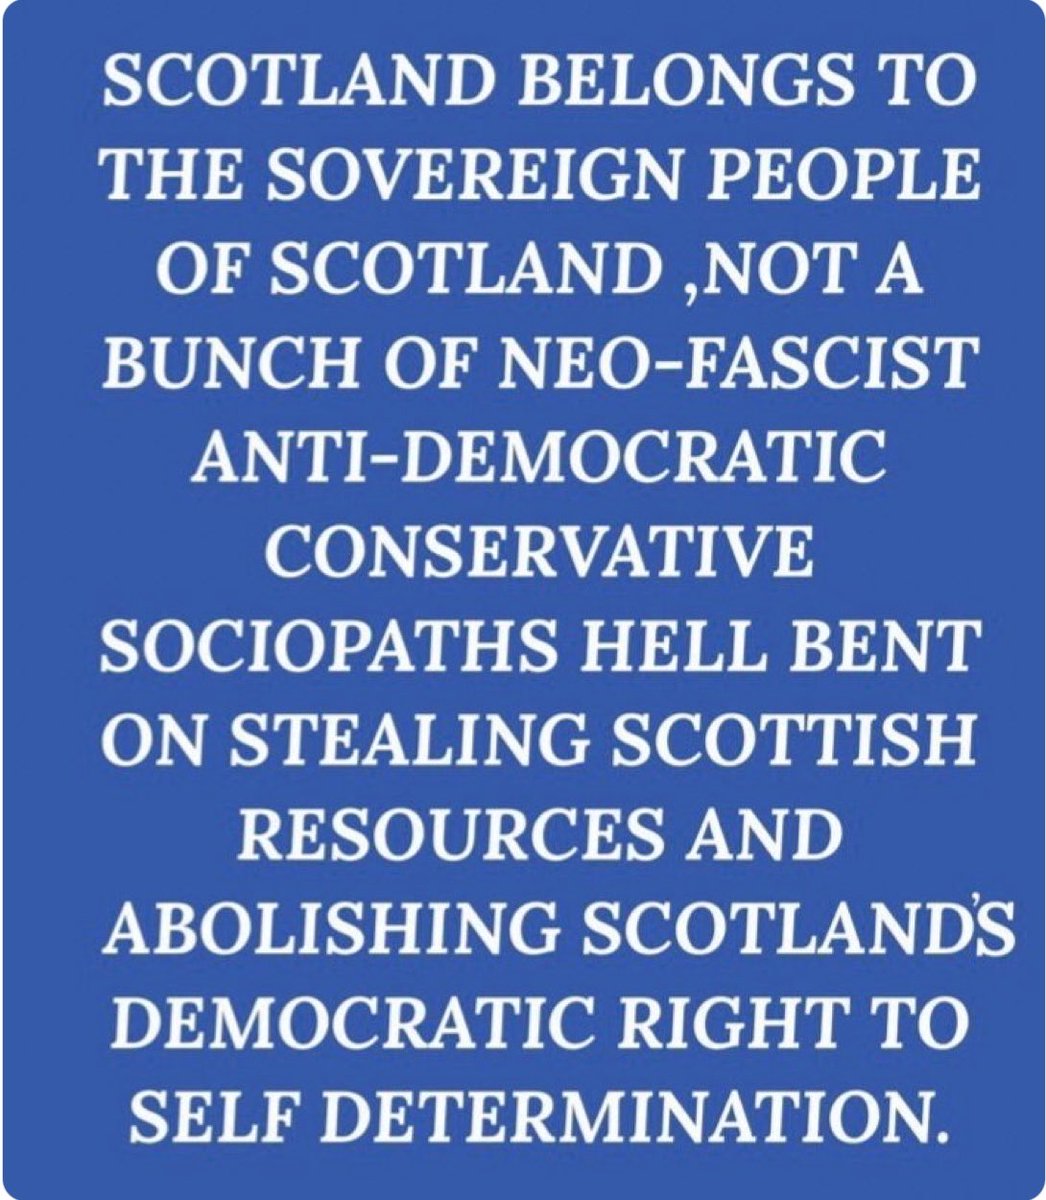 Vote ⁦@theSNP⁩ to get Scotland 🏴󠁧󠁢󠁳󠁣󠁴󠁿 out of this Unequal Union 🏴󠁧󠁢󠁳󠁣󠁴󠁿🏴󠁧󠁢󠁳󠁣󠁴󠁿🏴󠁧󠁢󠁳󠁣󠁴󠁿!